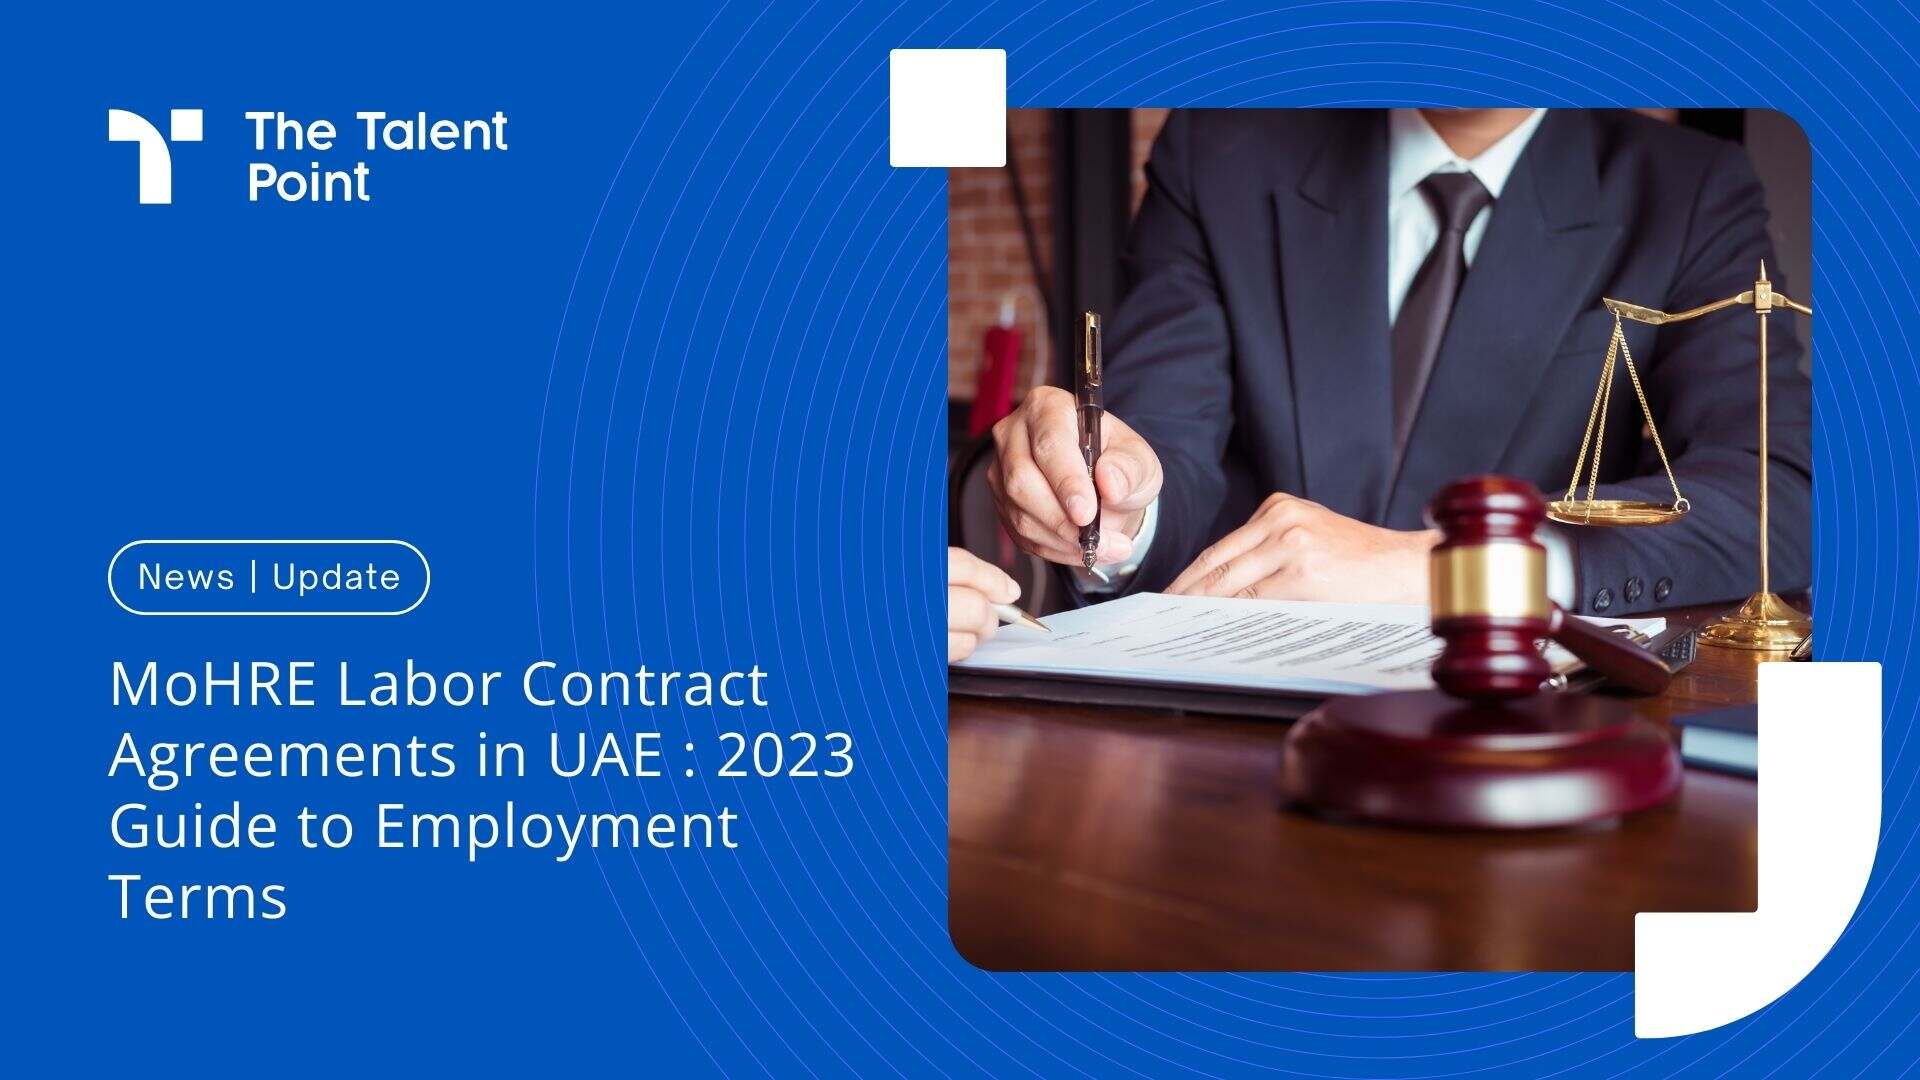 MoHRE Labor Contract Agreements in UAE : 2023 Guide to Employment Terms - TalentPoint